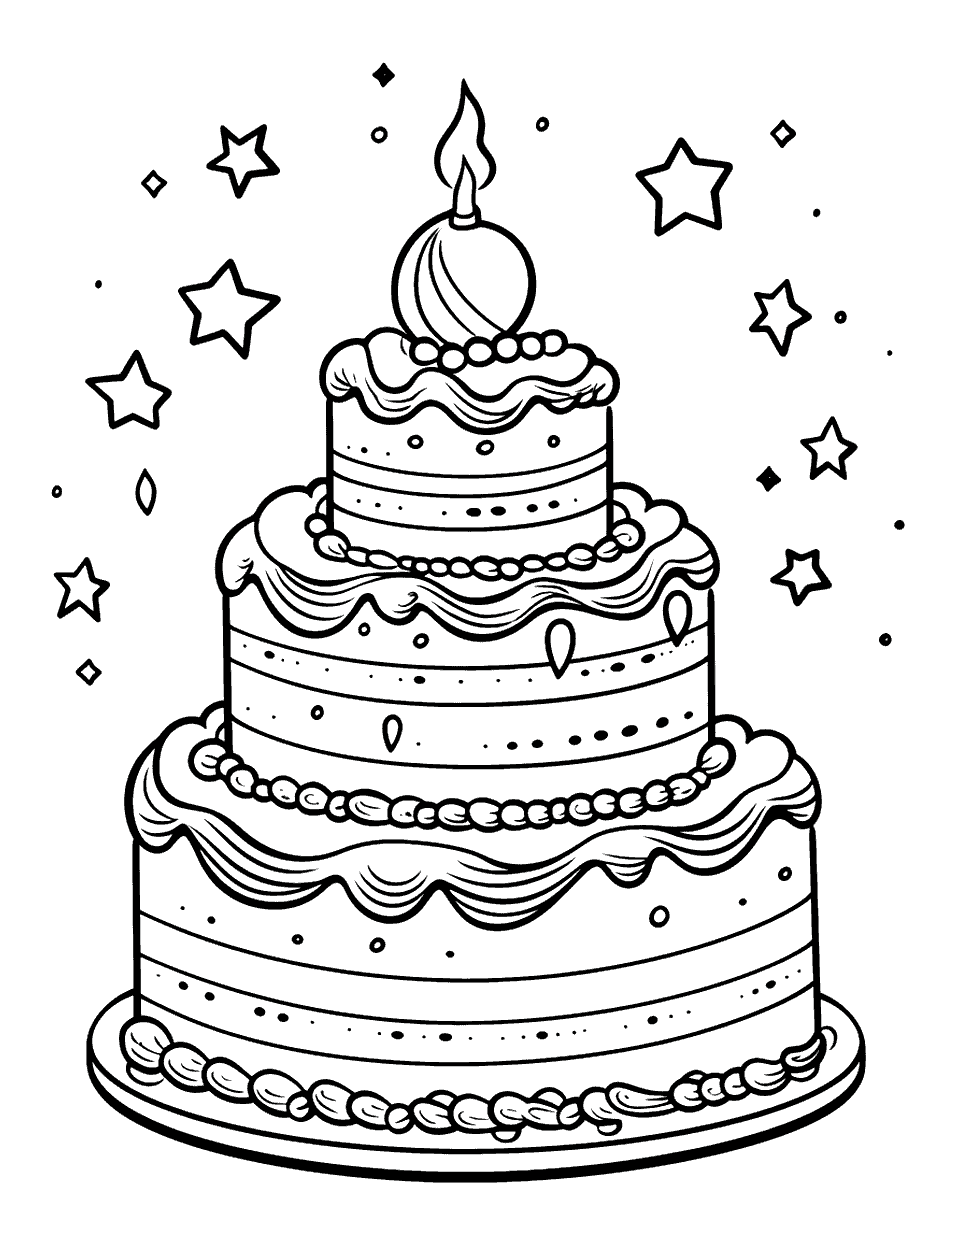 Starry Night Cake Coloring Page - A cake with a night sky theme, including stars.